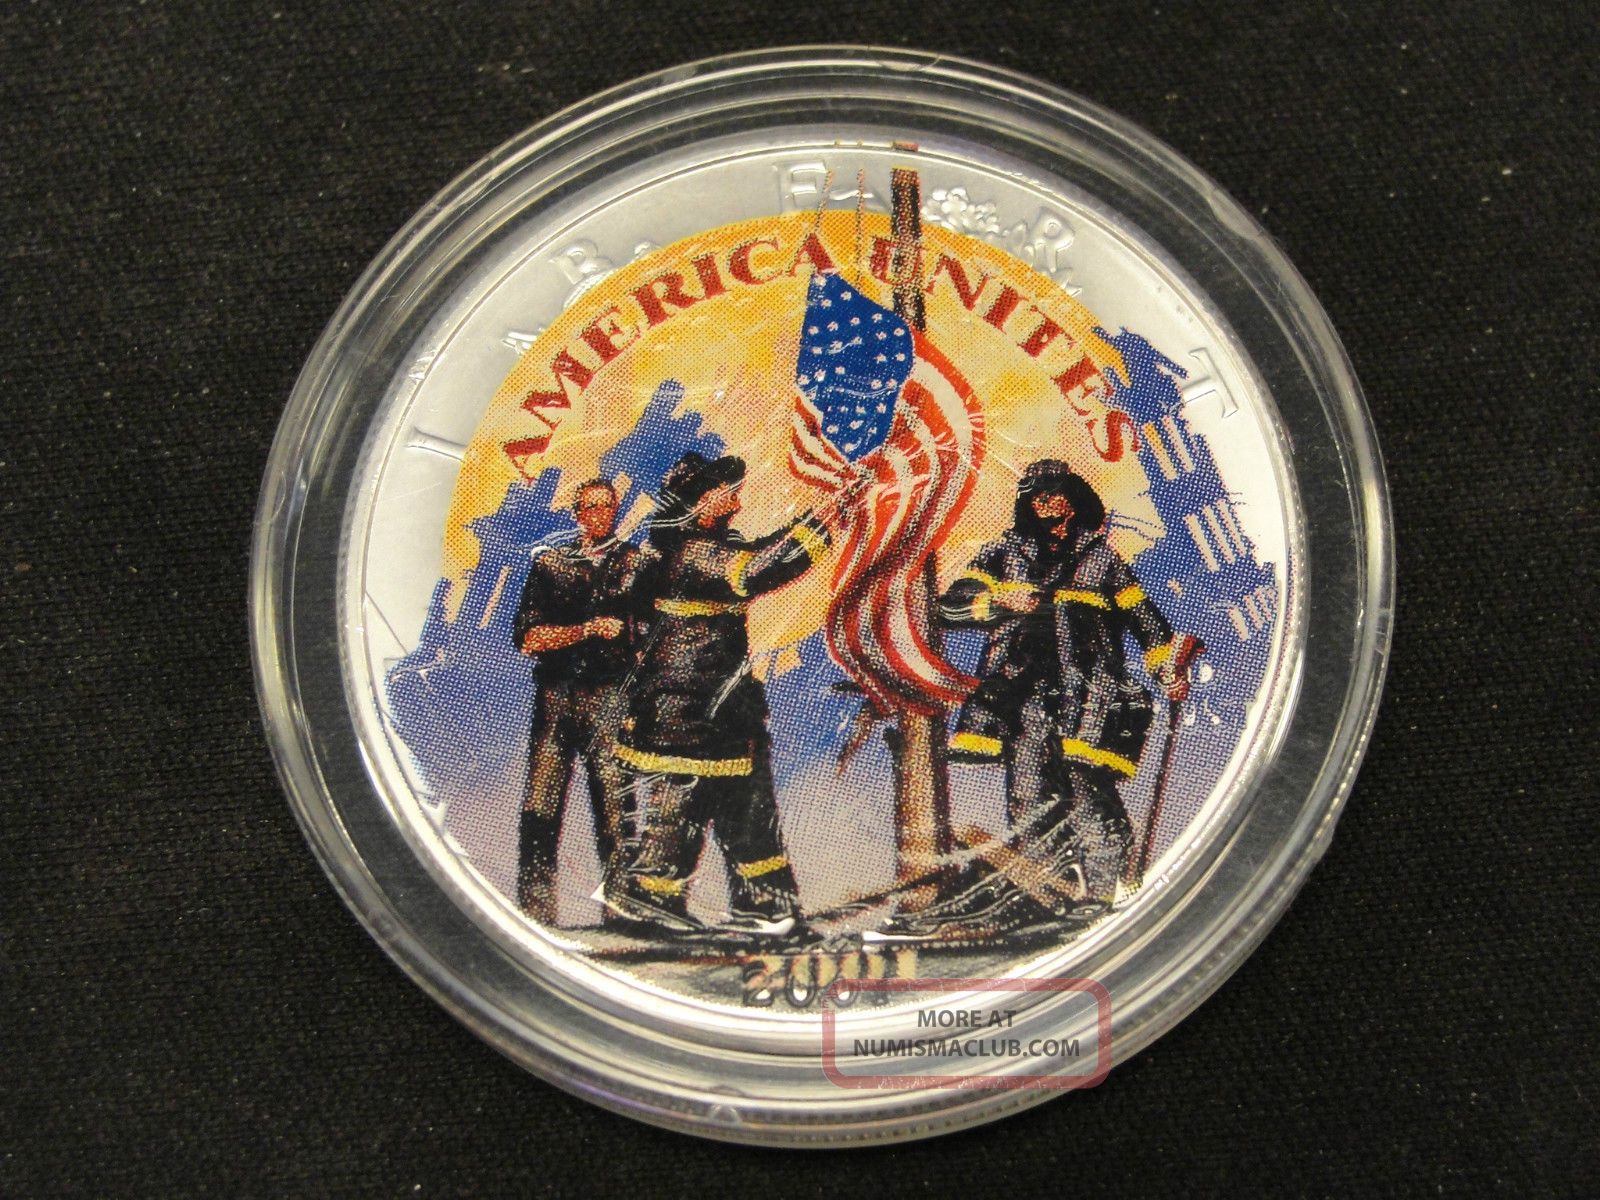 2001 Painted American Silver Eagle 1oz Remembering Our Heroes. 999 Fine